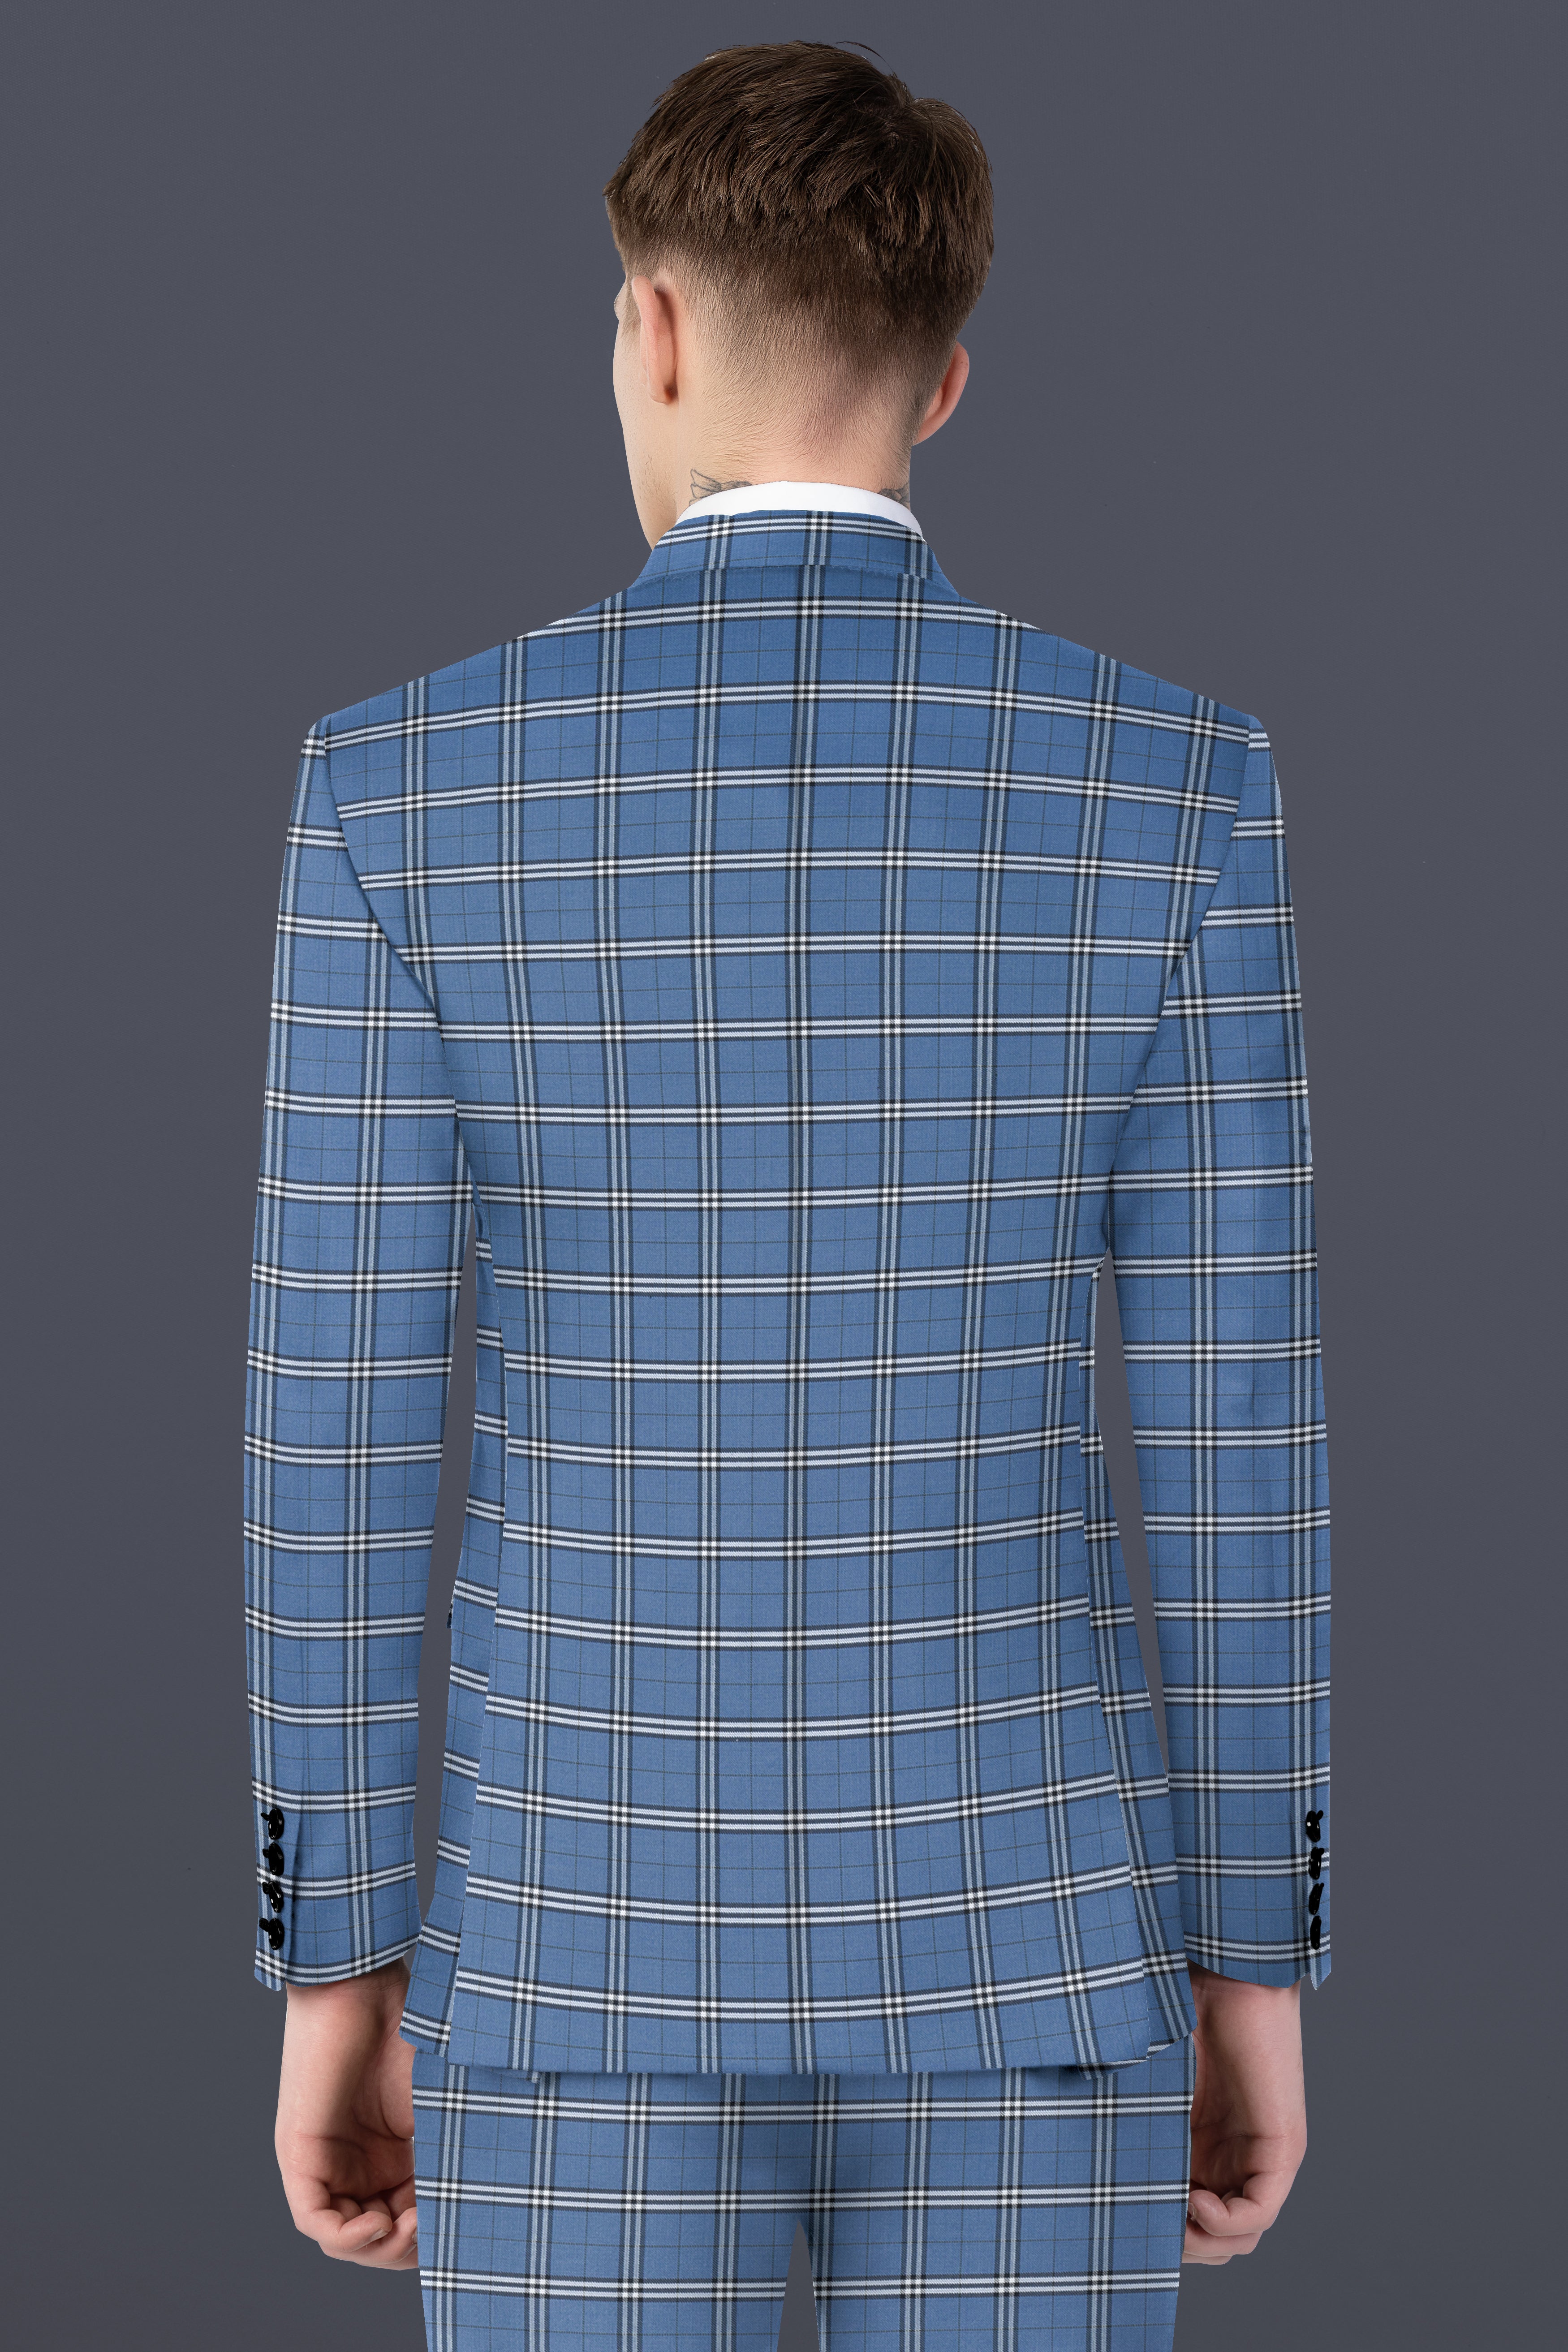 Metalic Blue Plaid Wool Blend Double Breasted Suit